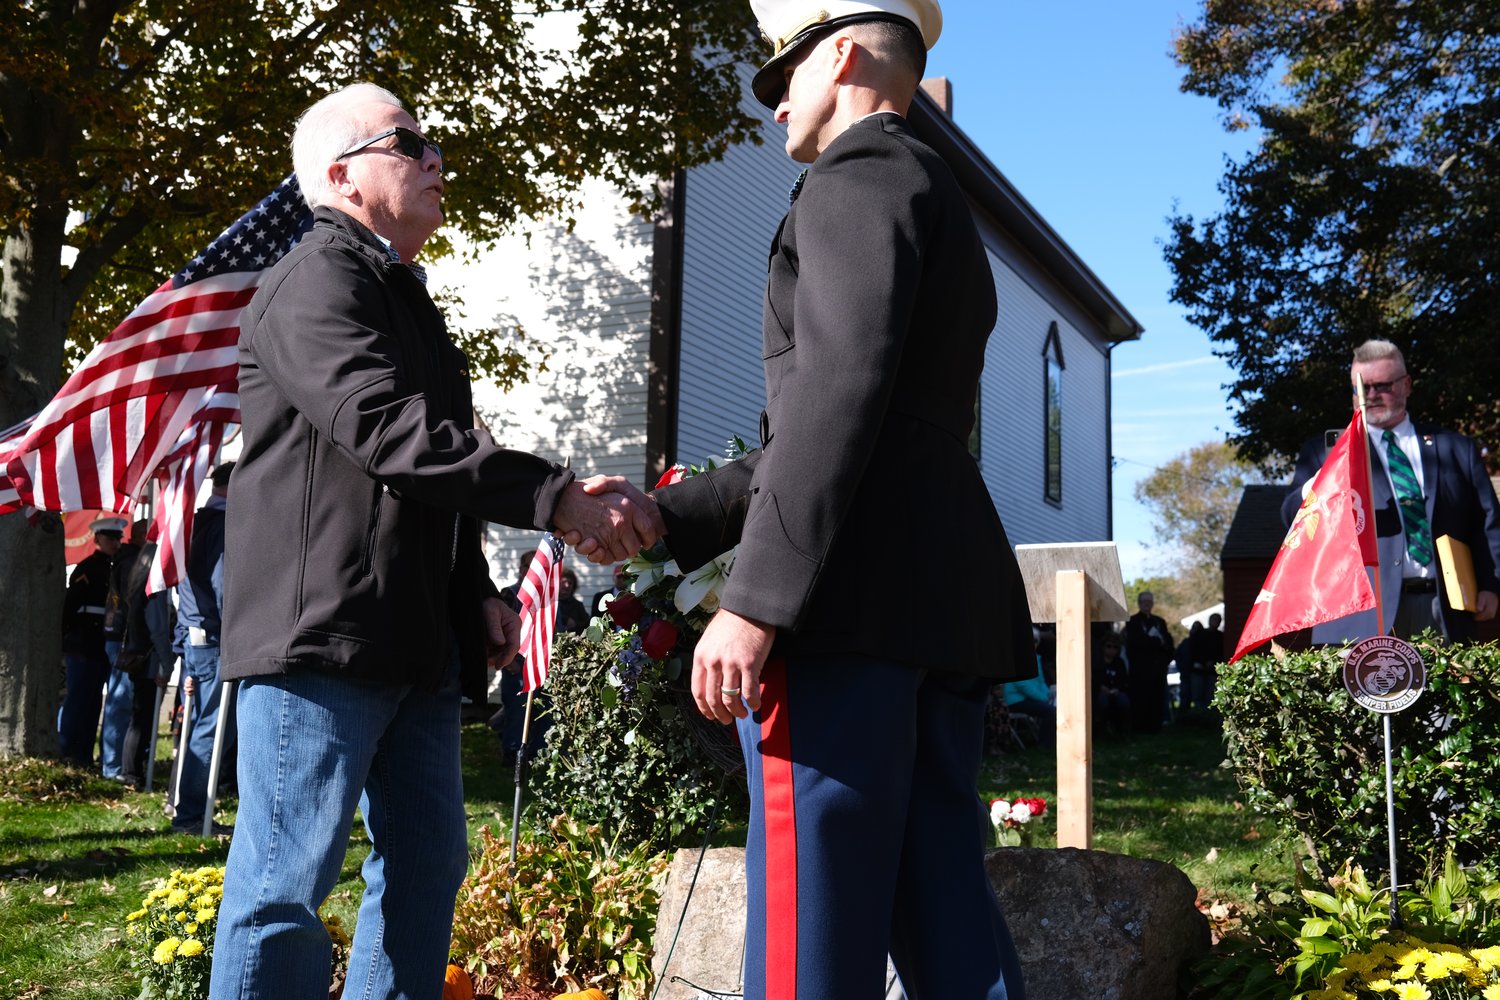 Billy Giblin (left) shakes hands with Lt. Col. Scott Stephan after they placed a wreath by the memorial to the “Rhode Island Nine.” Giblin is the brother of the late Sgt. Timothy Giblin, who was memorialized for his sacrifice in the Beirut barracks bombing of 1983.